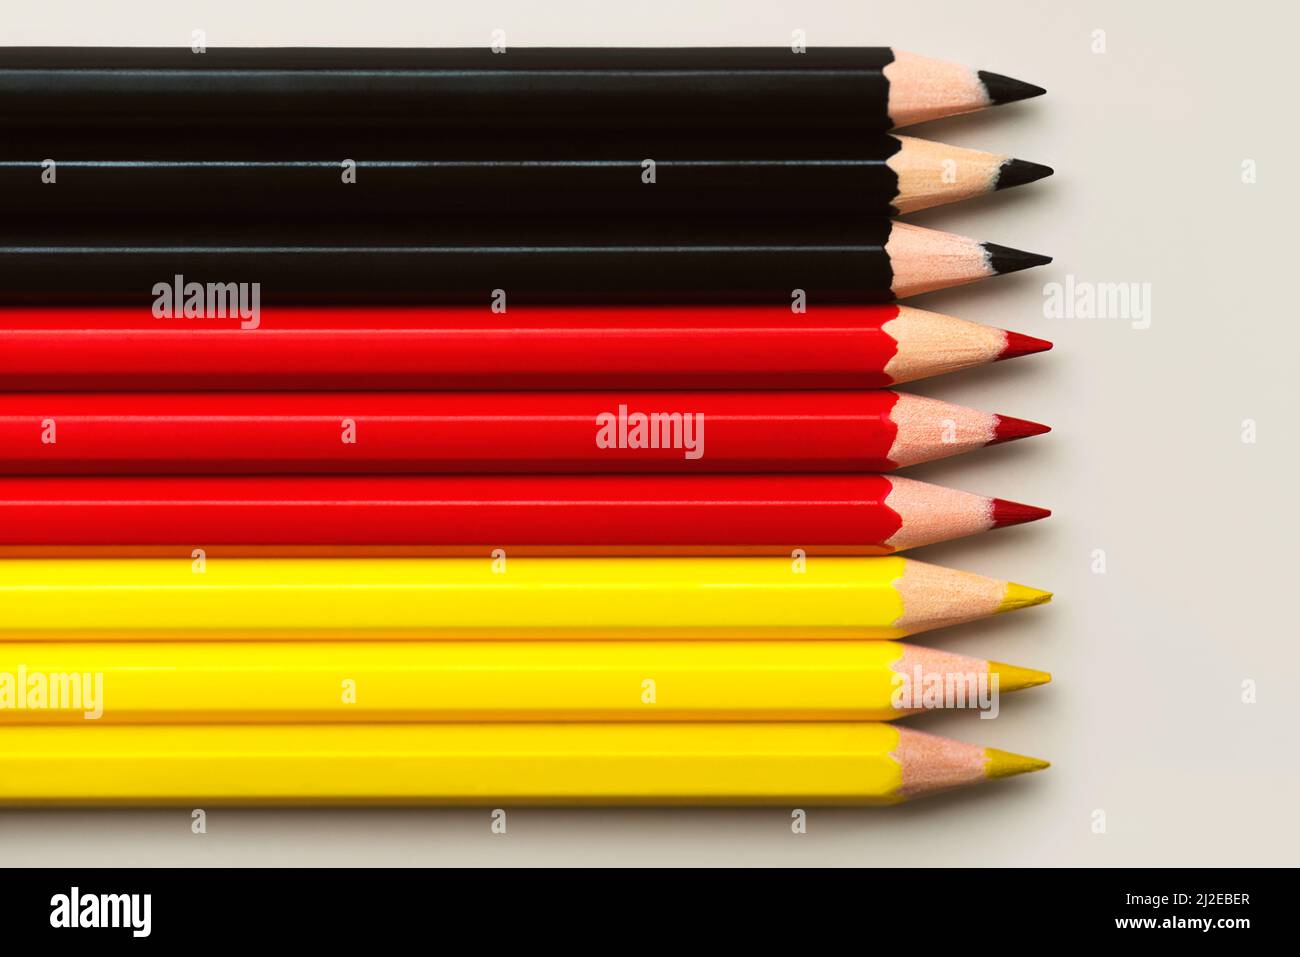 Top view of Germany flag made with black, red and yellow colored pencils with copy space over light background Stock Photo